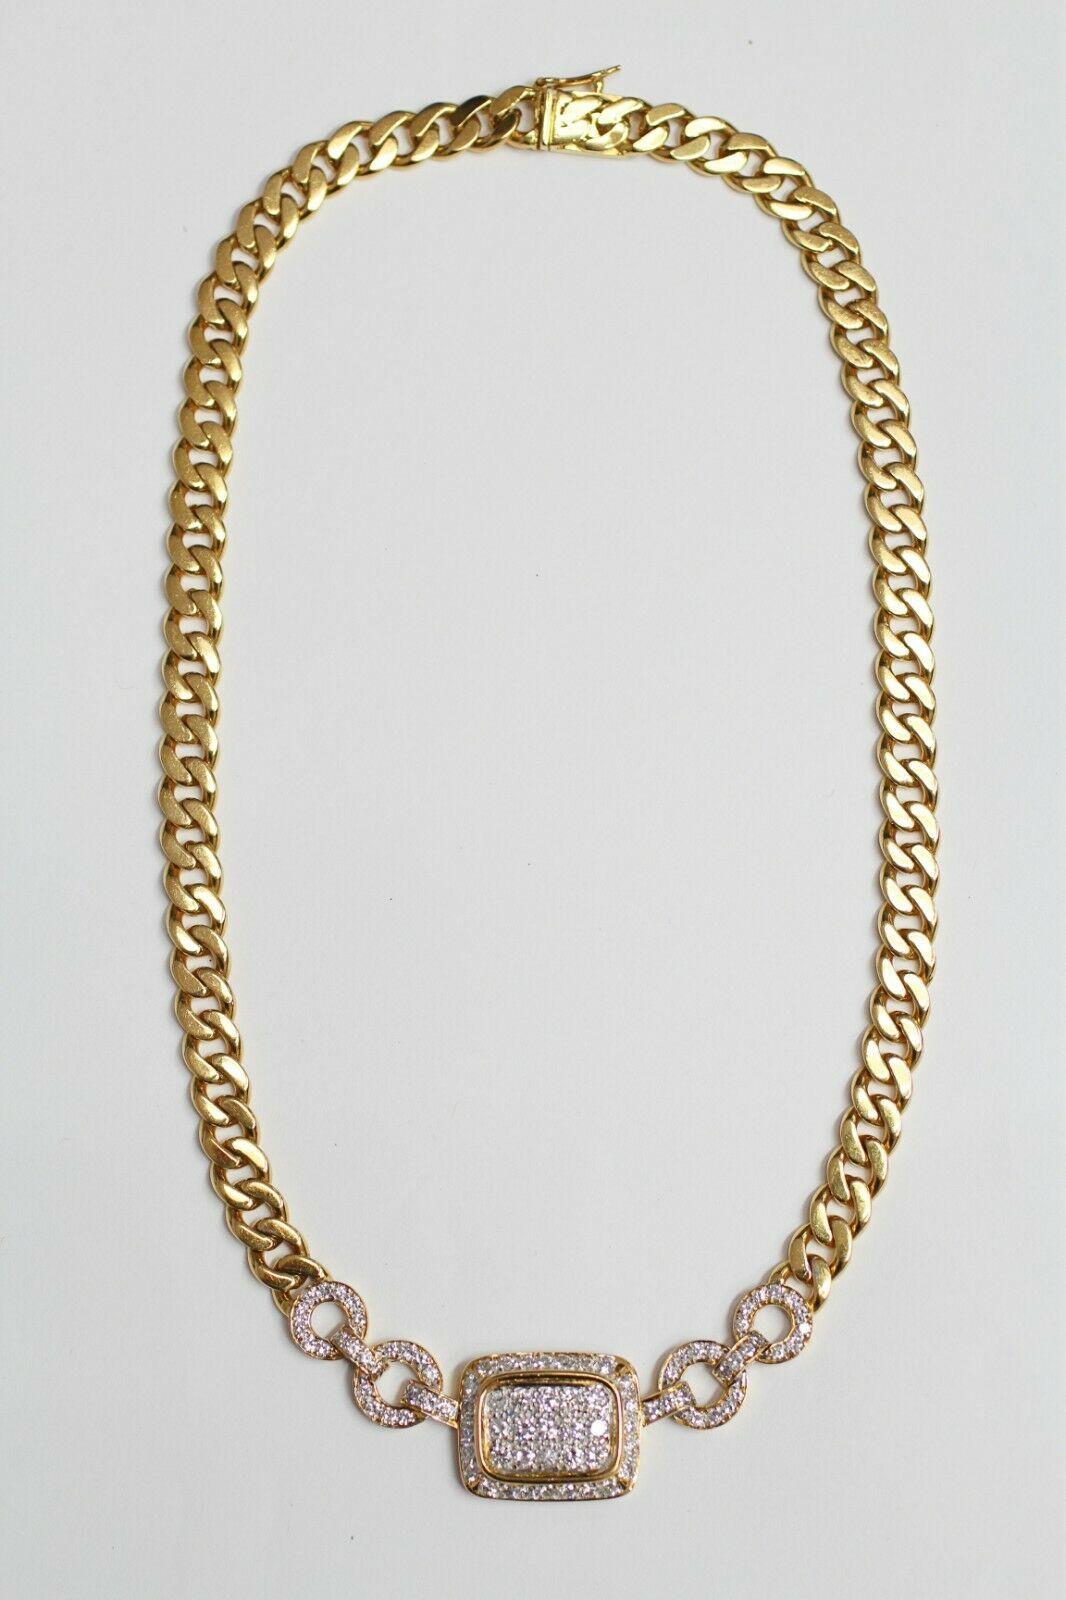  18k yellow gold diamond link necklace with 3.50cts., containing
Specifications:
    DIAMONDS: ROUND CUT DIAMONDS
    carat total weight: 3.50CTW
    color: F/G
    clarity: VS
    brand: custom
    metal: 18k YELLOW gold
    type: LINK PENDANT
   